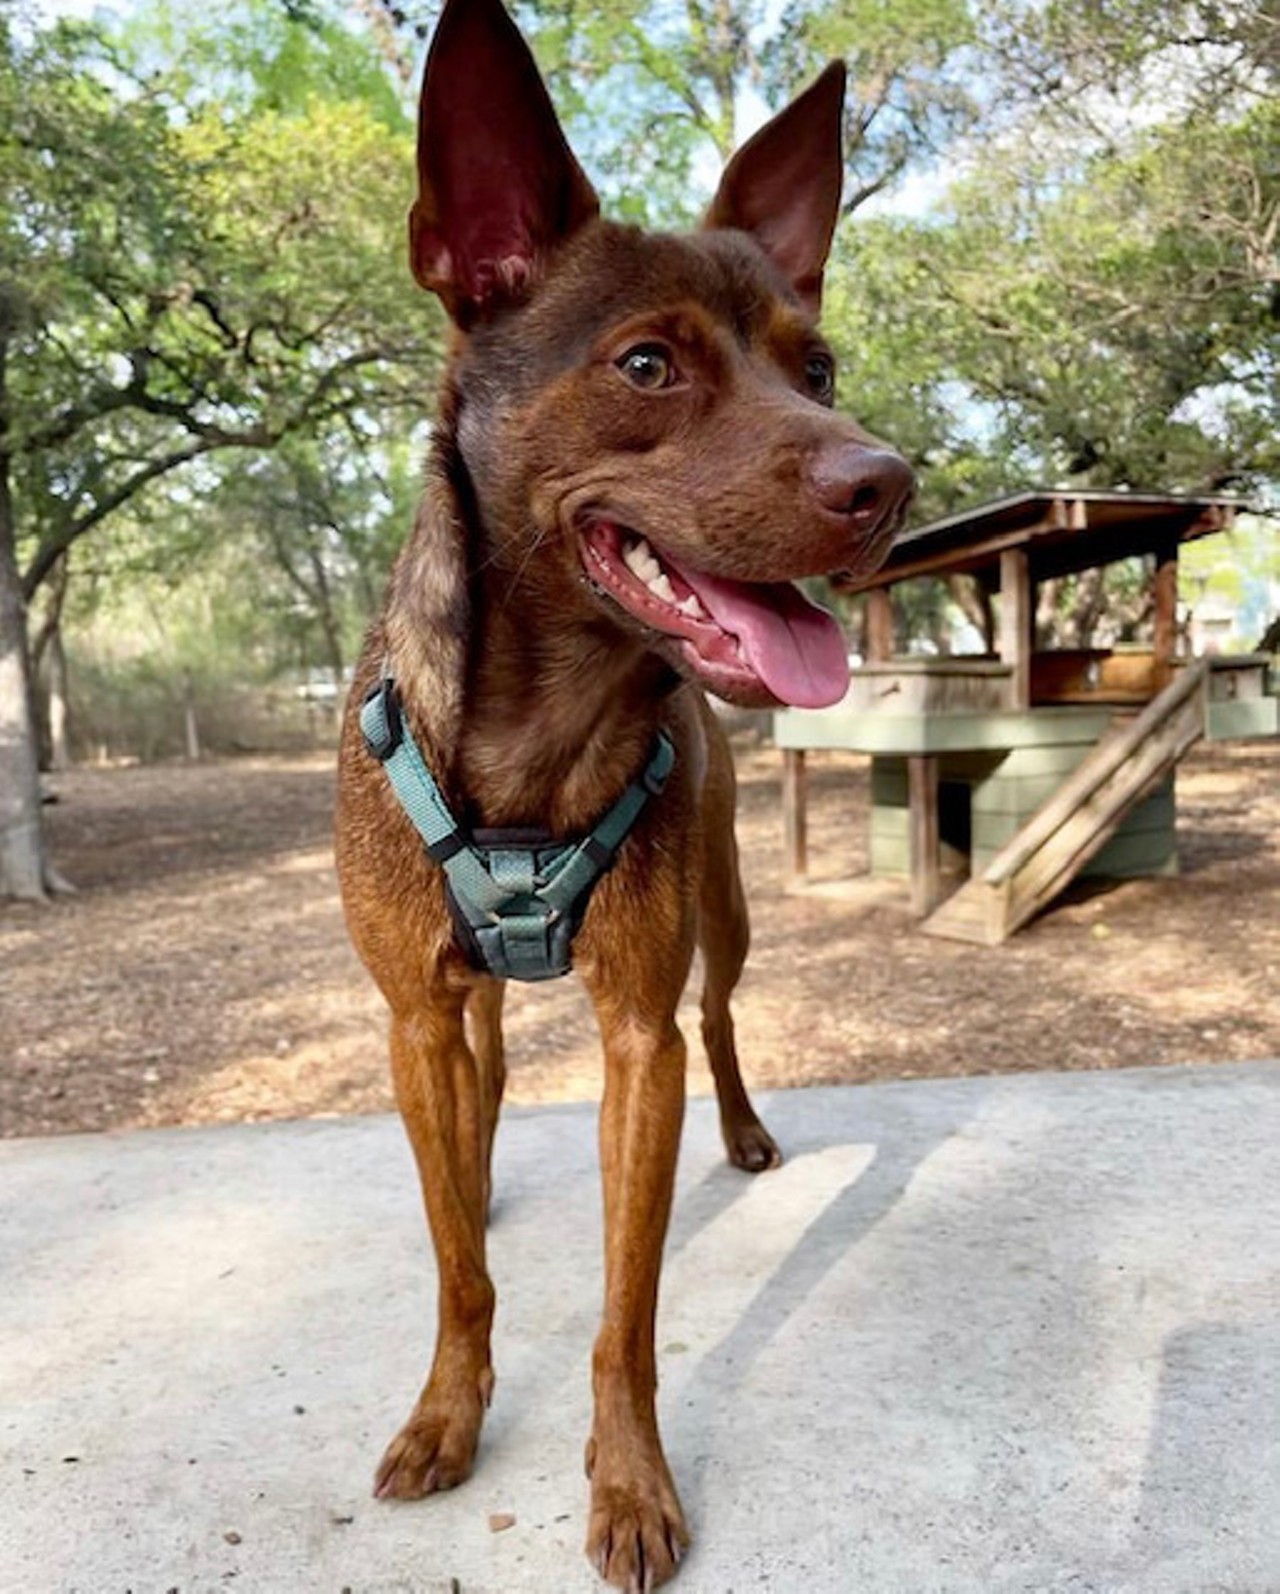 Let your pup run free at Phil Hardberger’s two dog parks8400 NW Military Hwy. or 13203 Blanco Rd., (210) 207-7275, sanantonio.gov For off-leash adventures with four-legged friends, Phil Hardberger Park has two dog parks that make up the City’s largest dog-dedicated outdoor space. The Park’s east entrance has a 1.8-acre park for dogs to stretch their paws, while the on the west side is 1.5 acres. Both parks have large and small dog areas, and are equipped with amenities including obstacle courses, a two-story doghouse for smaller pups and a shady area with picnic tables and seating for owners to lounge.             Photo via Instagram / the_heckin_philosodog